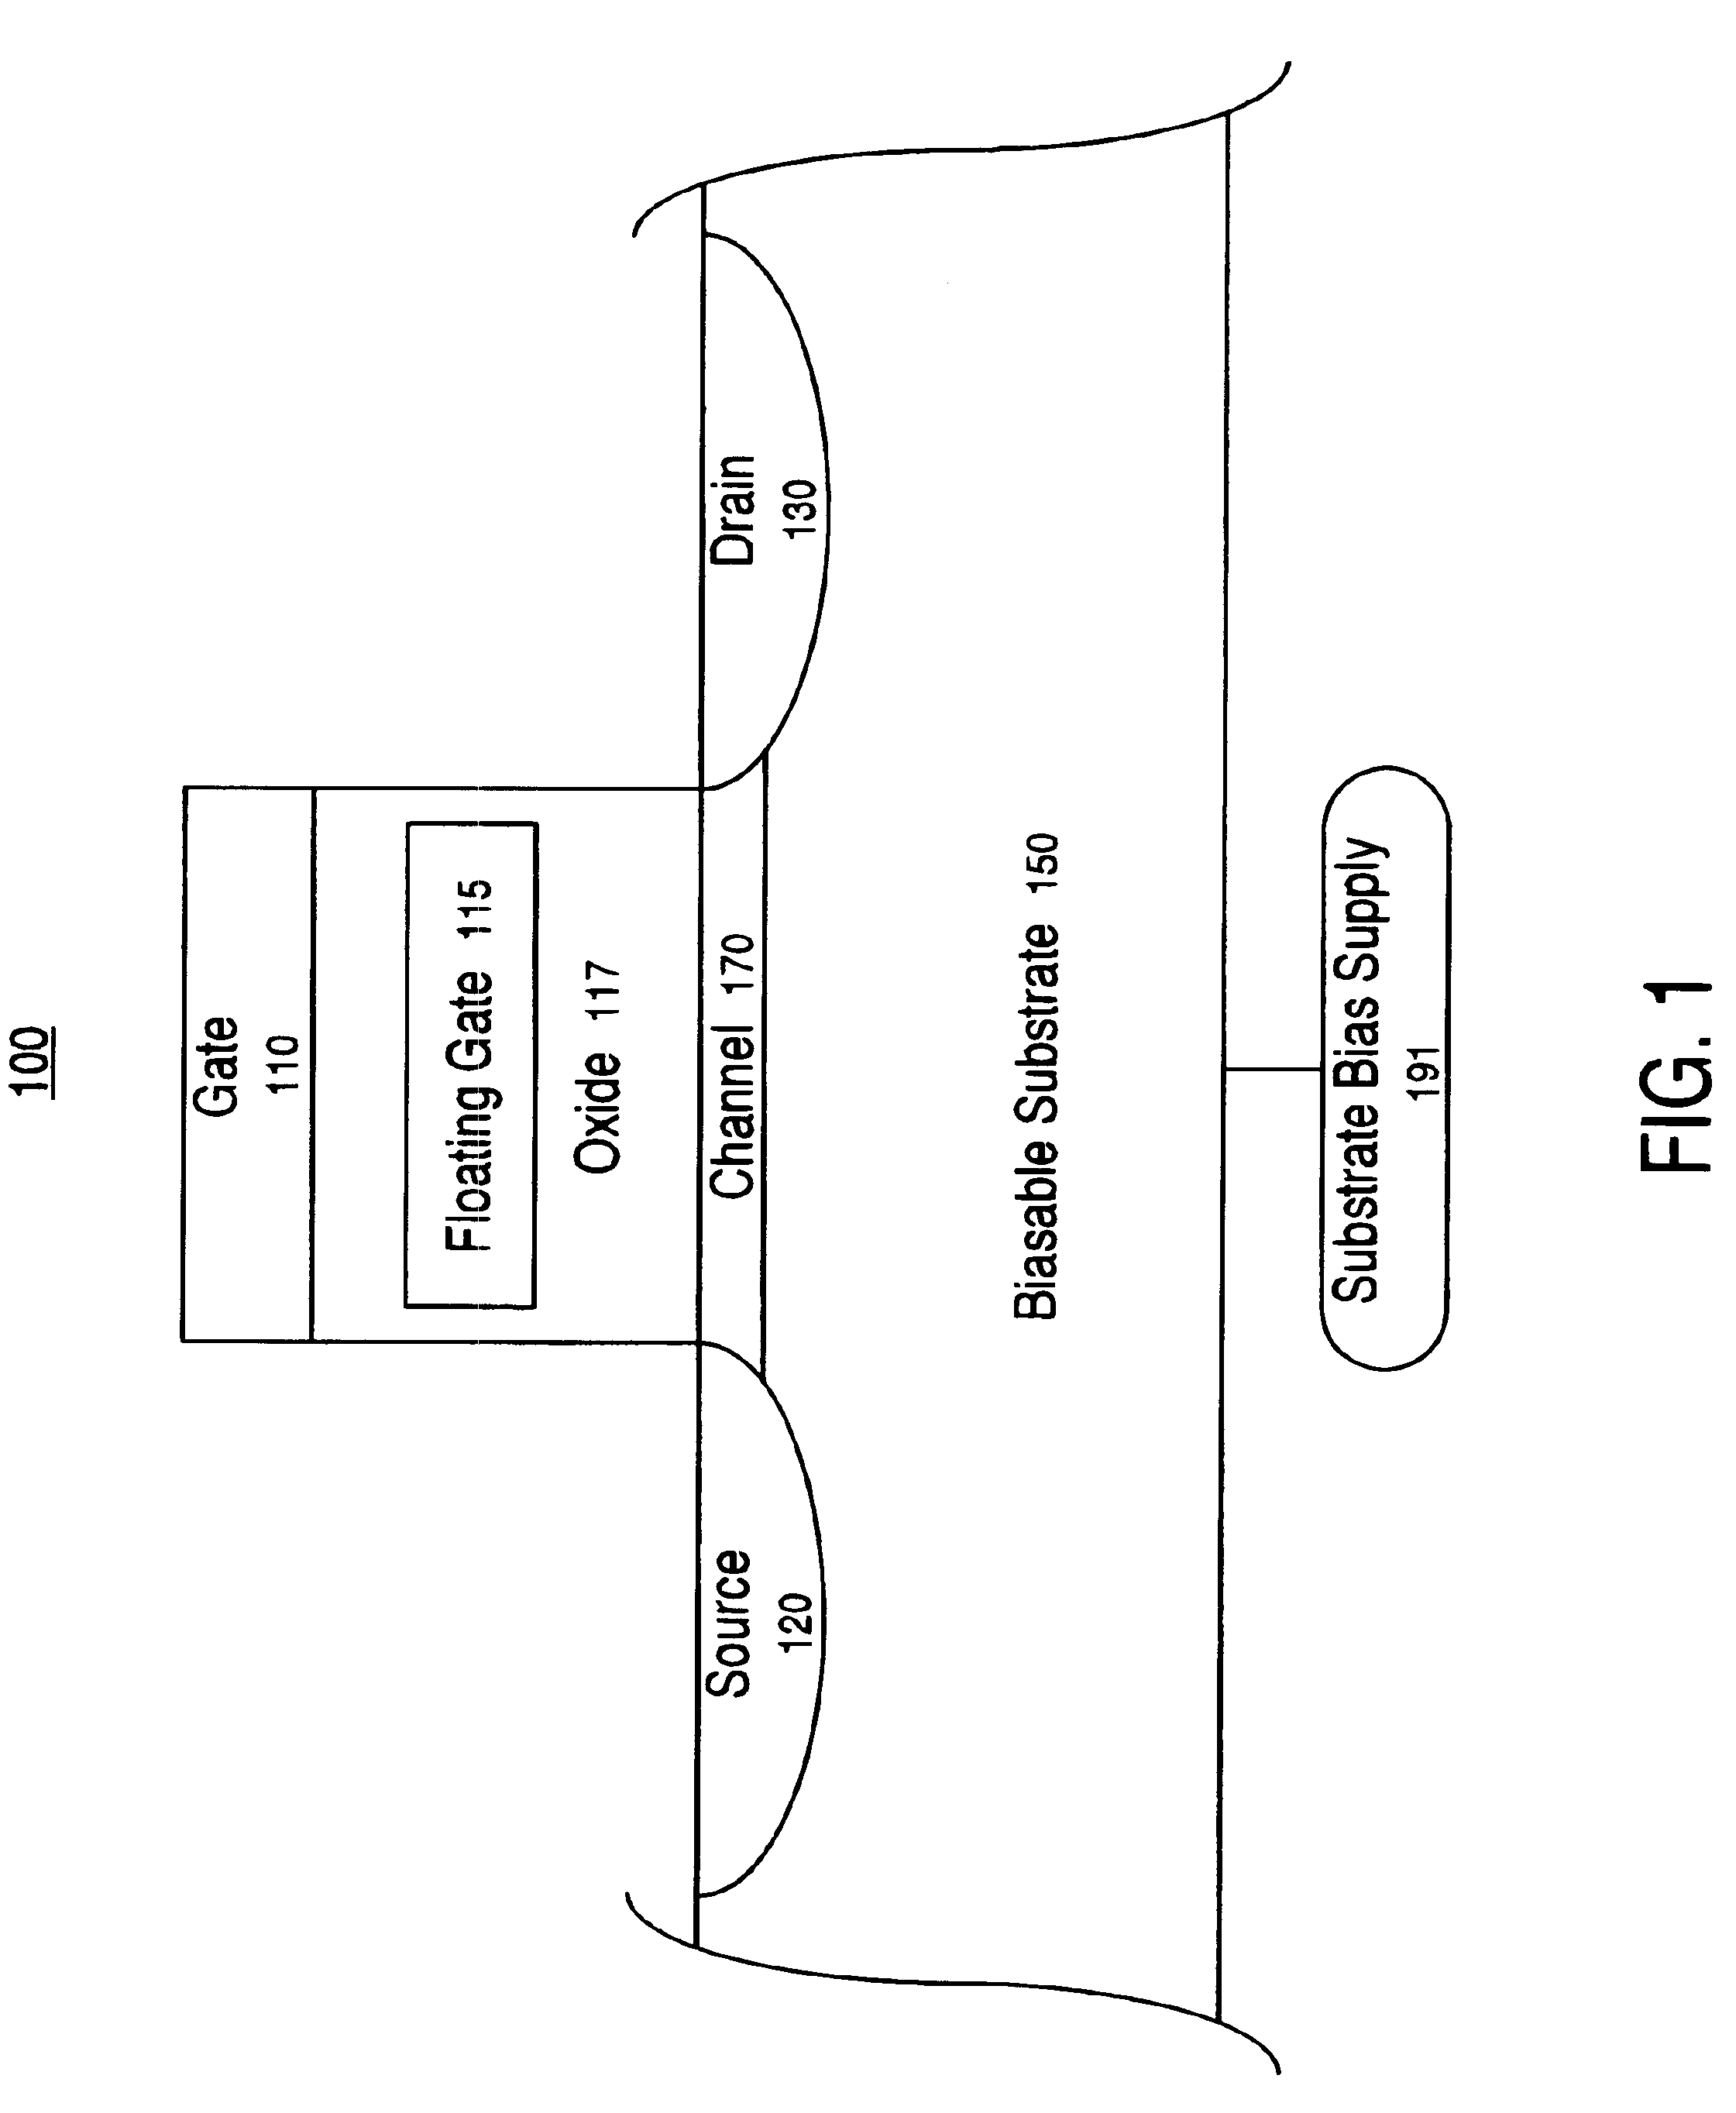 Flash memory cell programming method and system